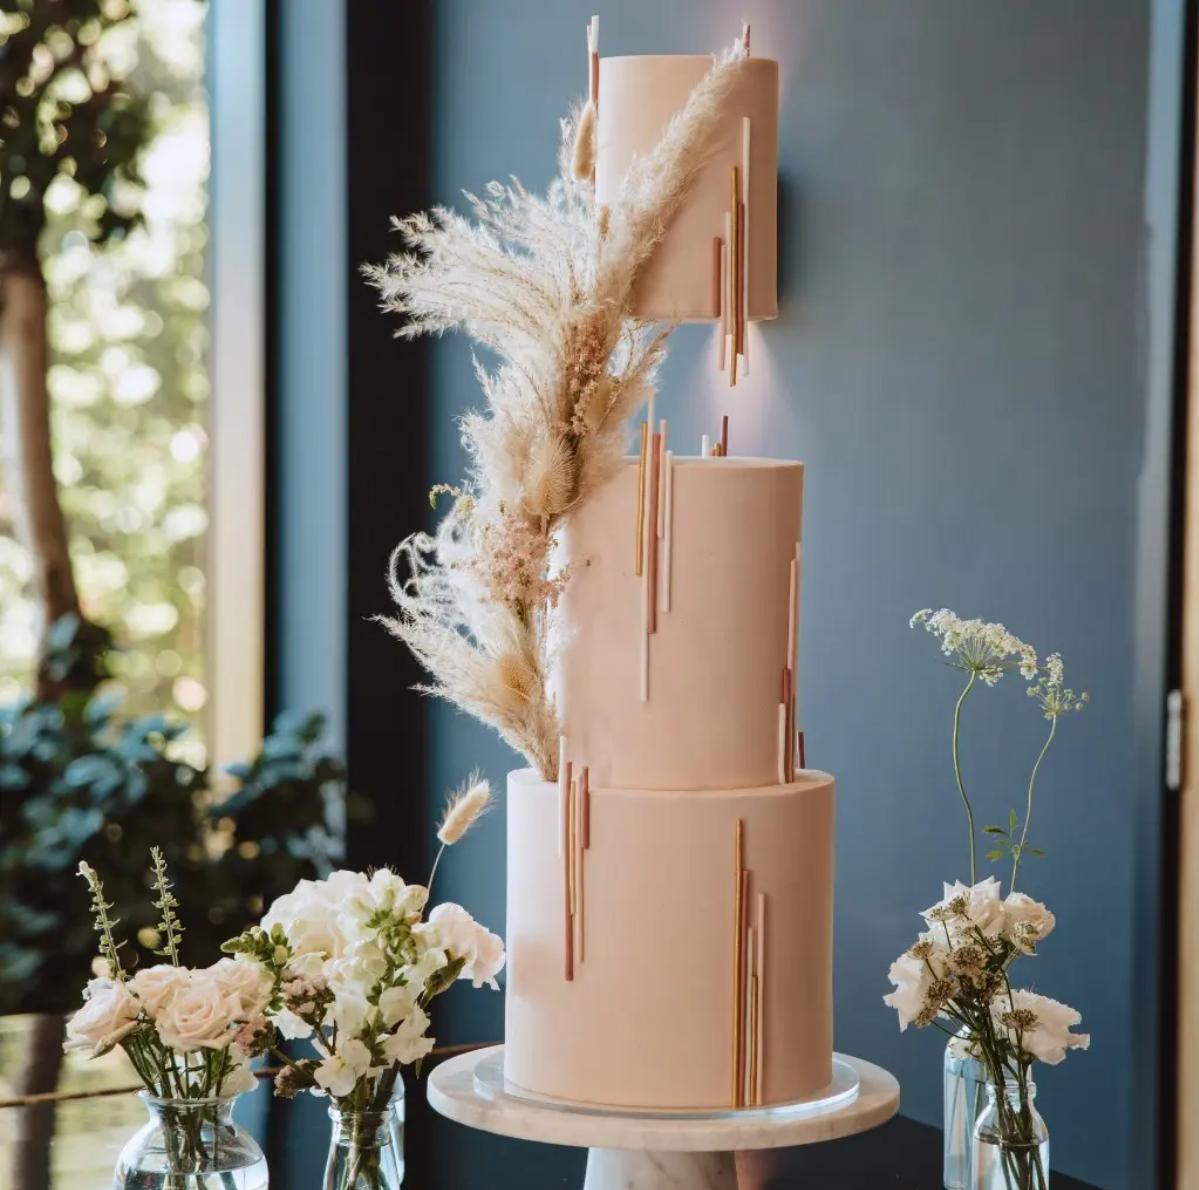 A Twist on The Traditional - Contemporary White Wedding Cakes